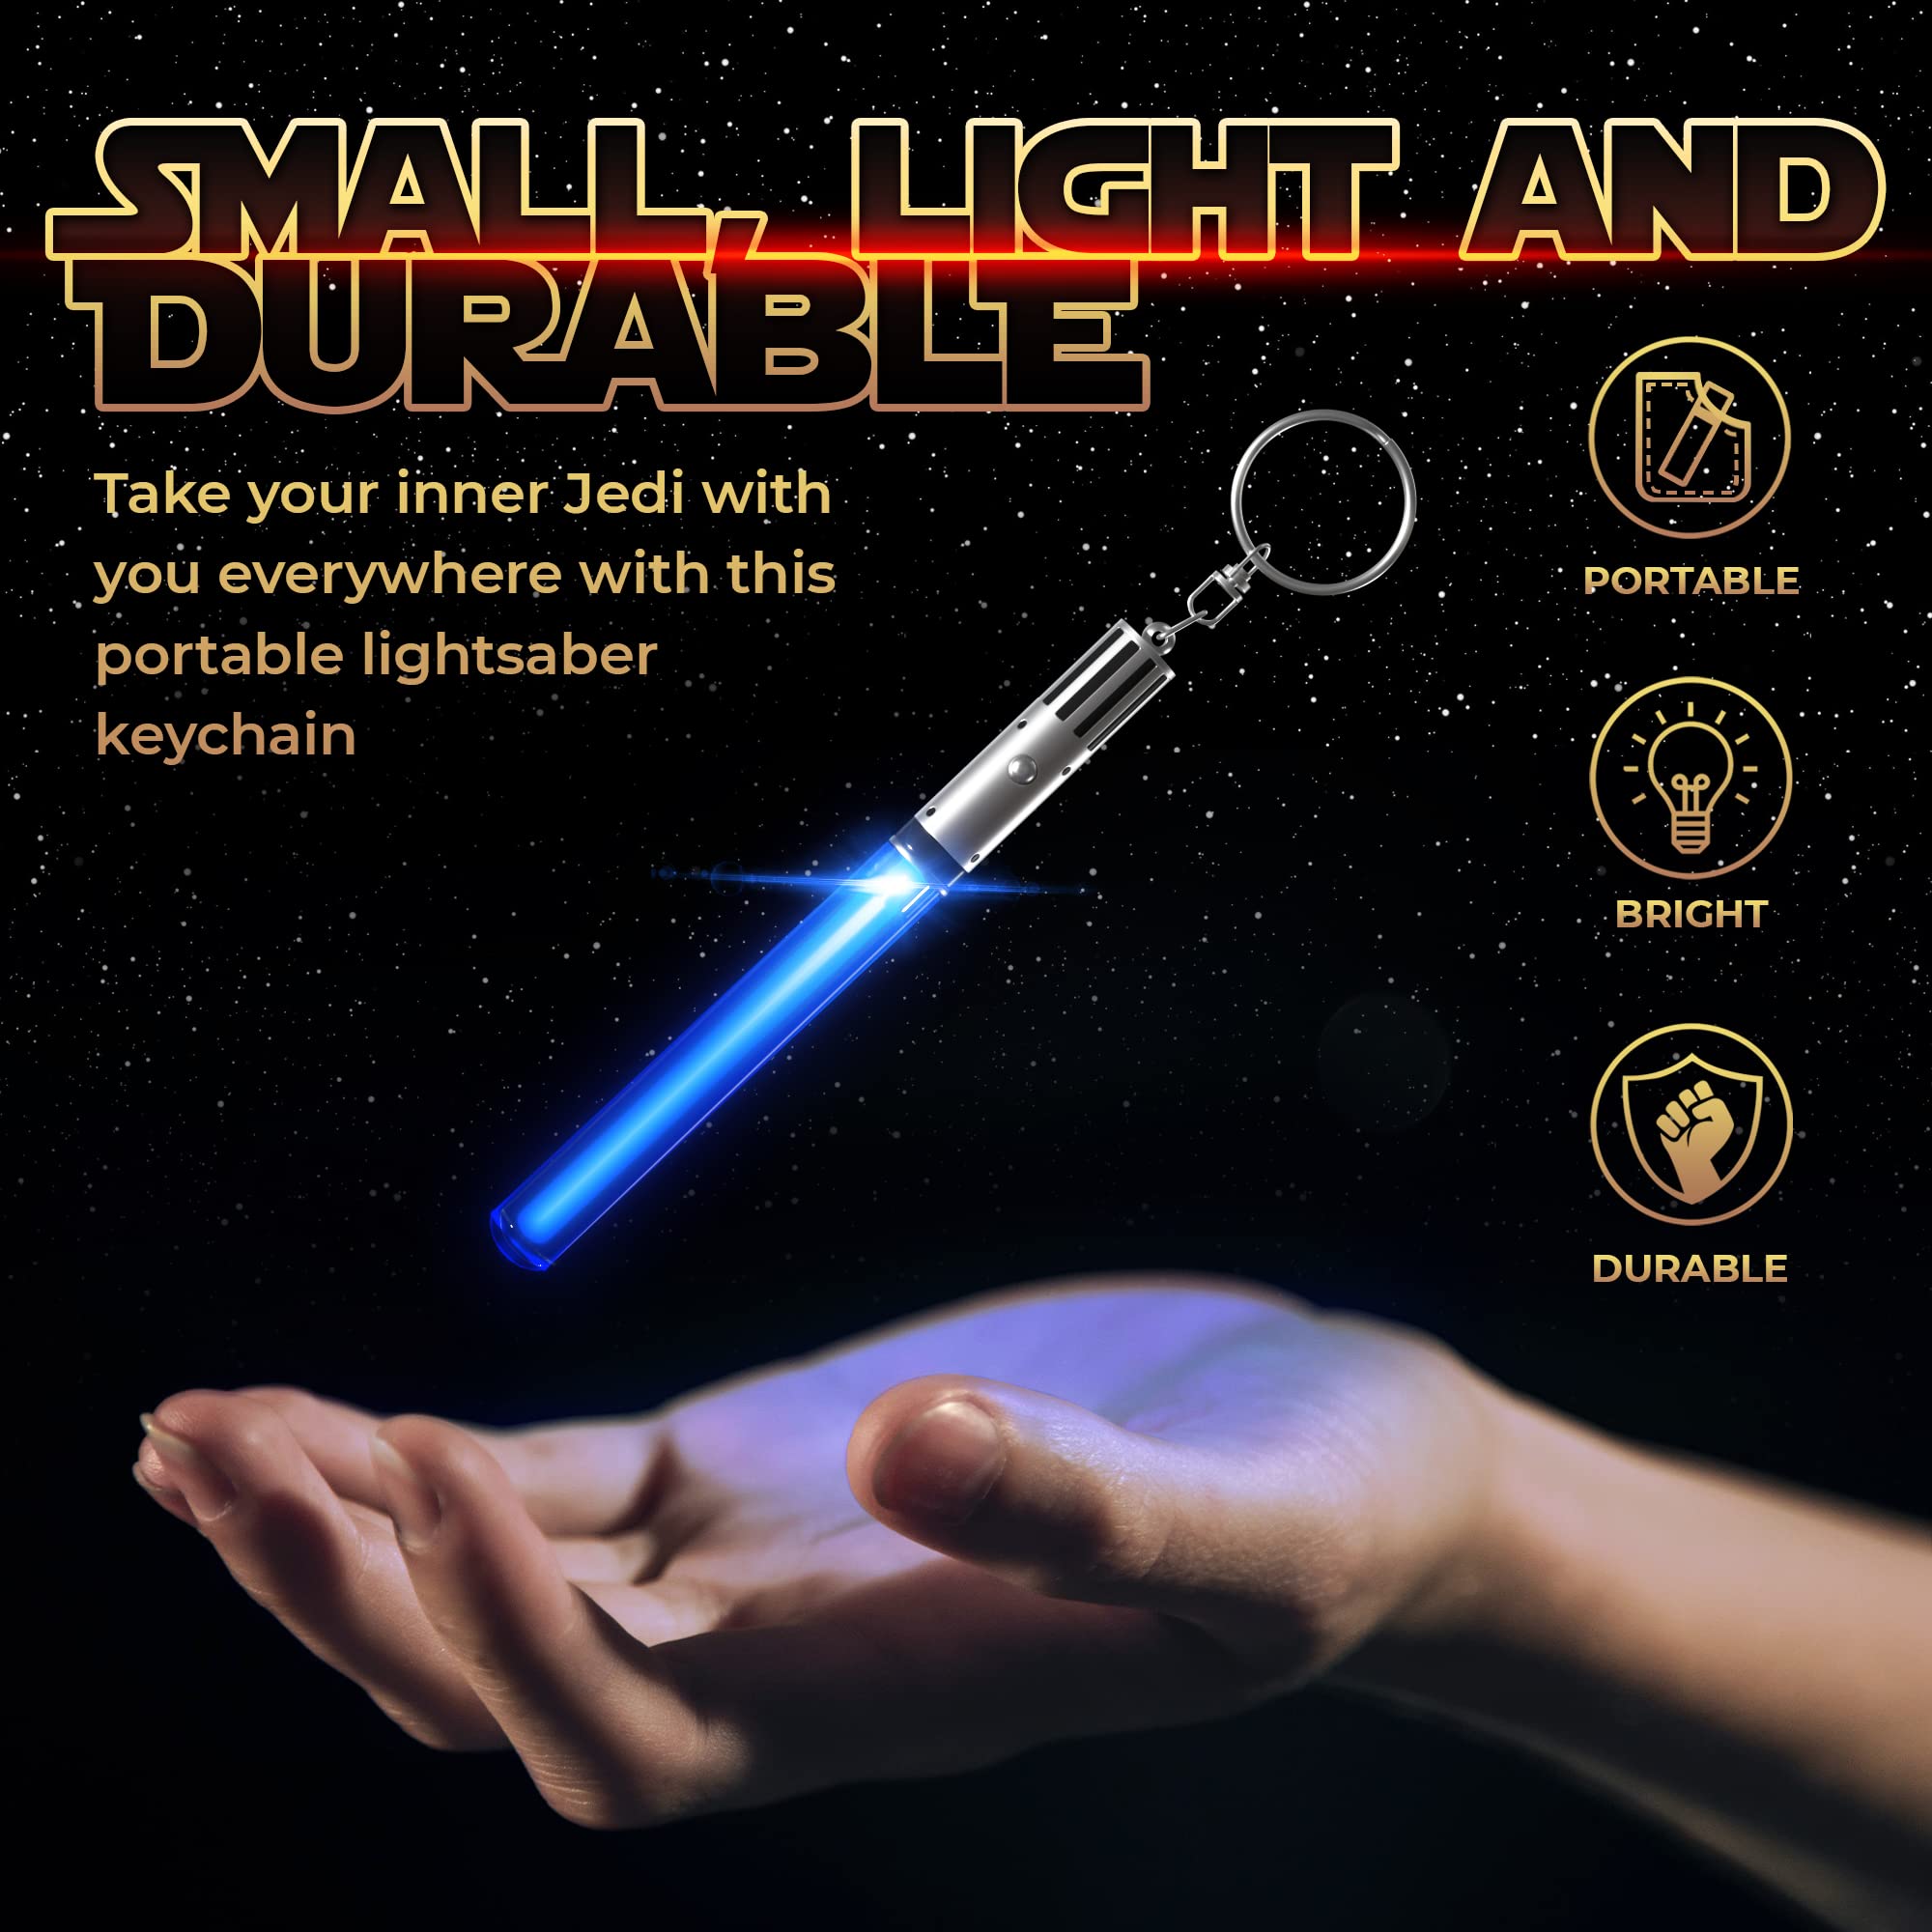 LIGHTSABER KEYCHAIN LIGHT UP LED STAR WARS Glowing Light Saber Key Chain Lightup Sabers 8 COLOR MODES: Green, Blue, Red, Baby Blue, Pink, Yellow, White, Rainbow - 1 PACK